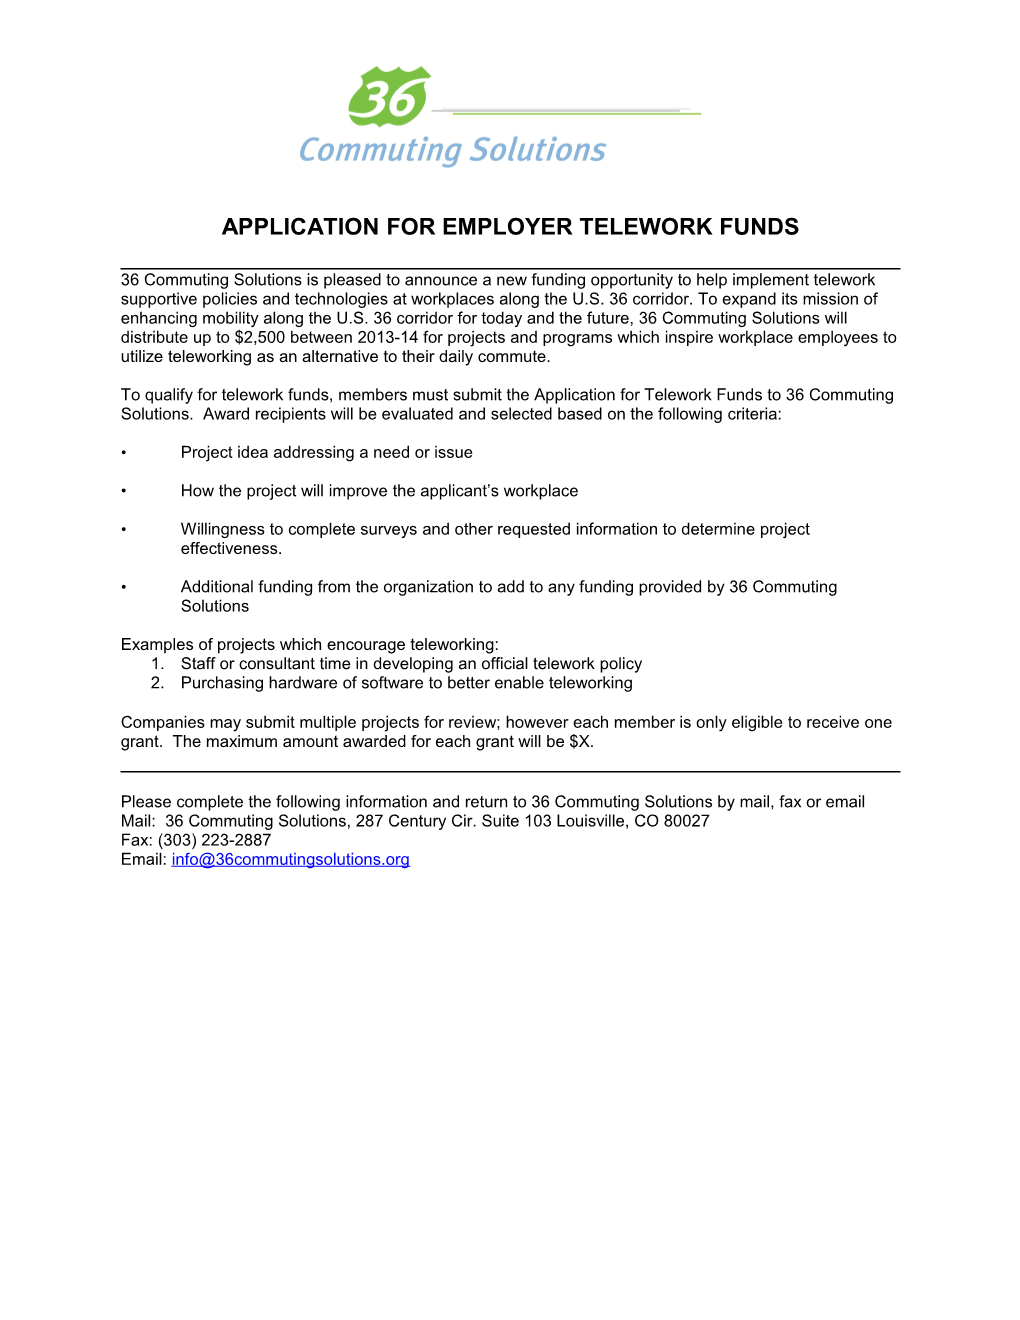 APPLICATION for Employer TELEWORK Funds